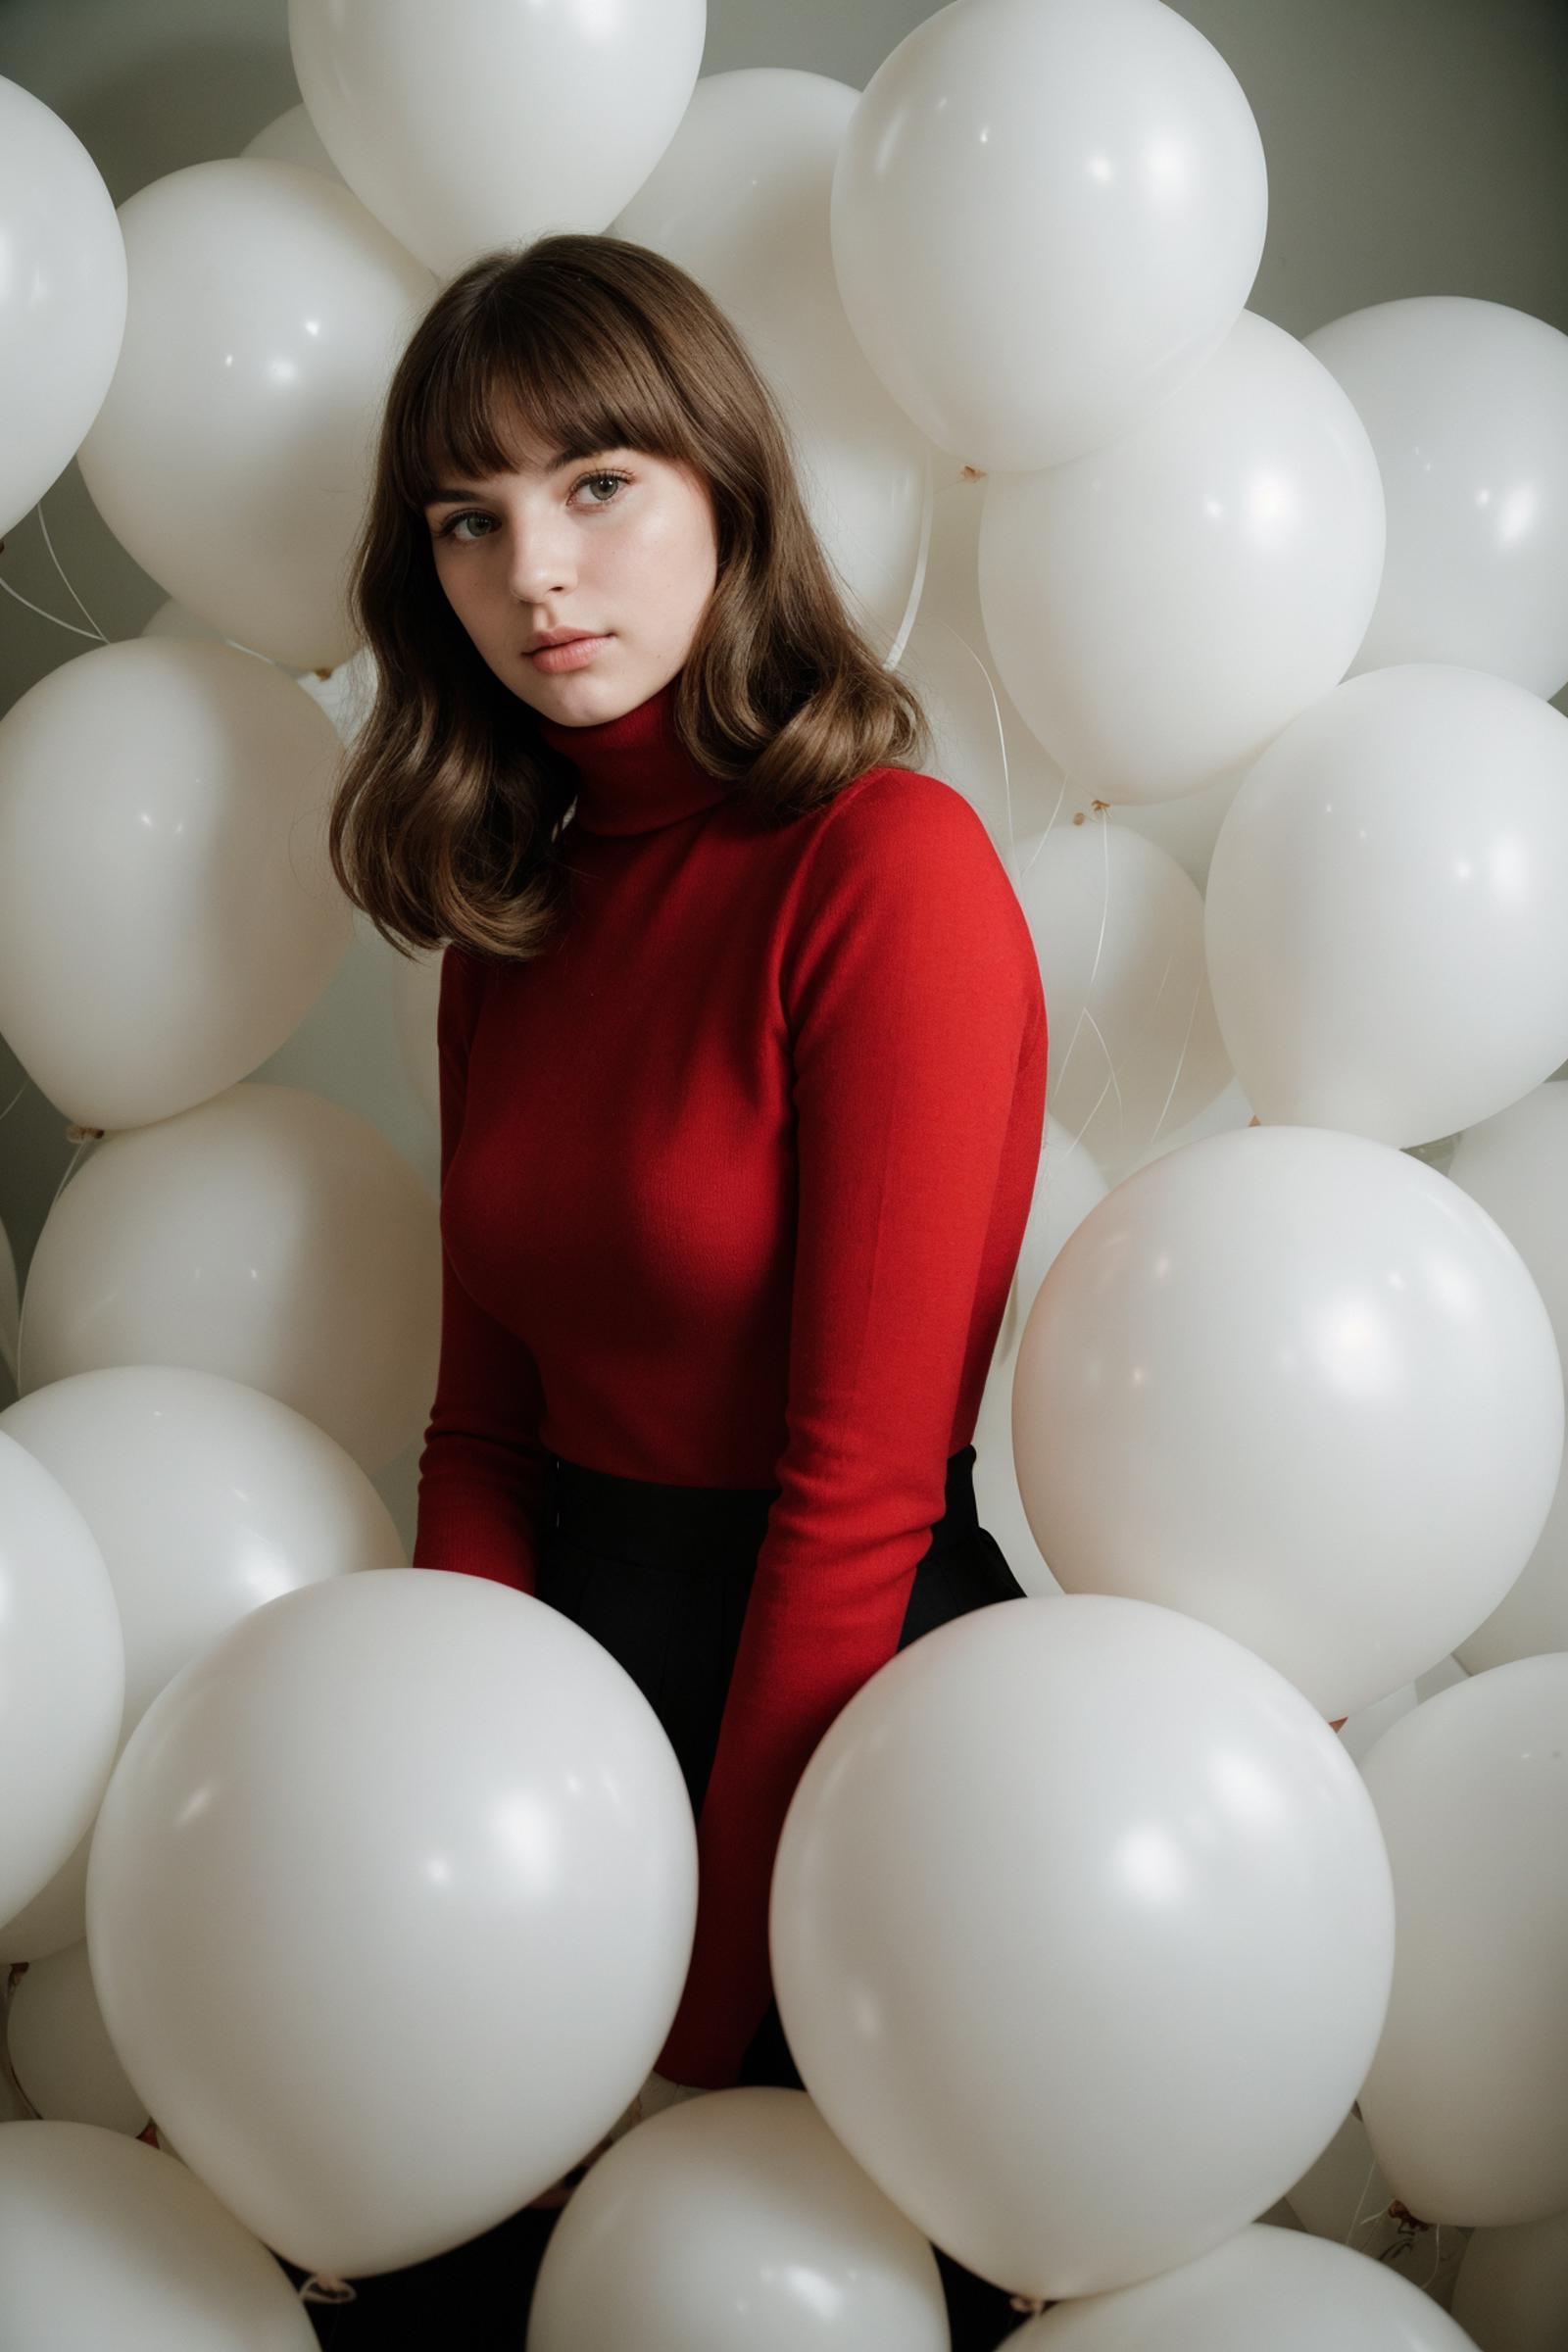 A woman in a red shirt stands surrounded by white balloons.